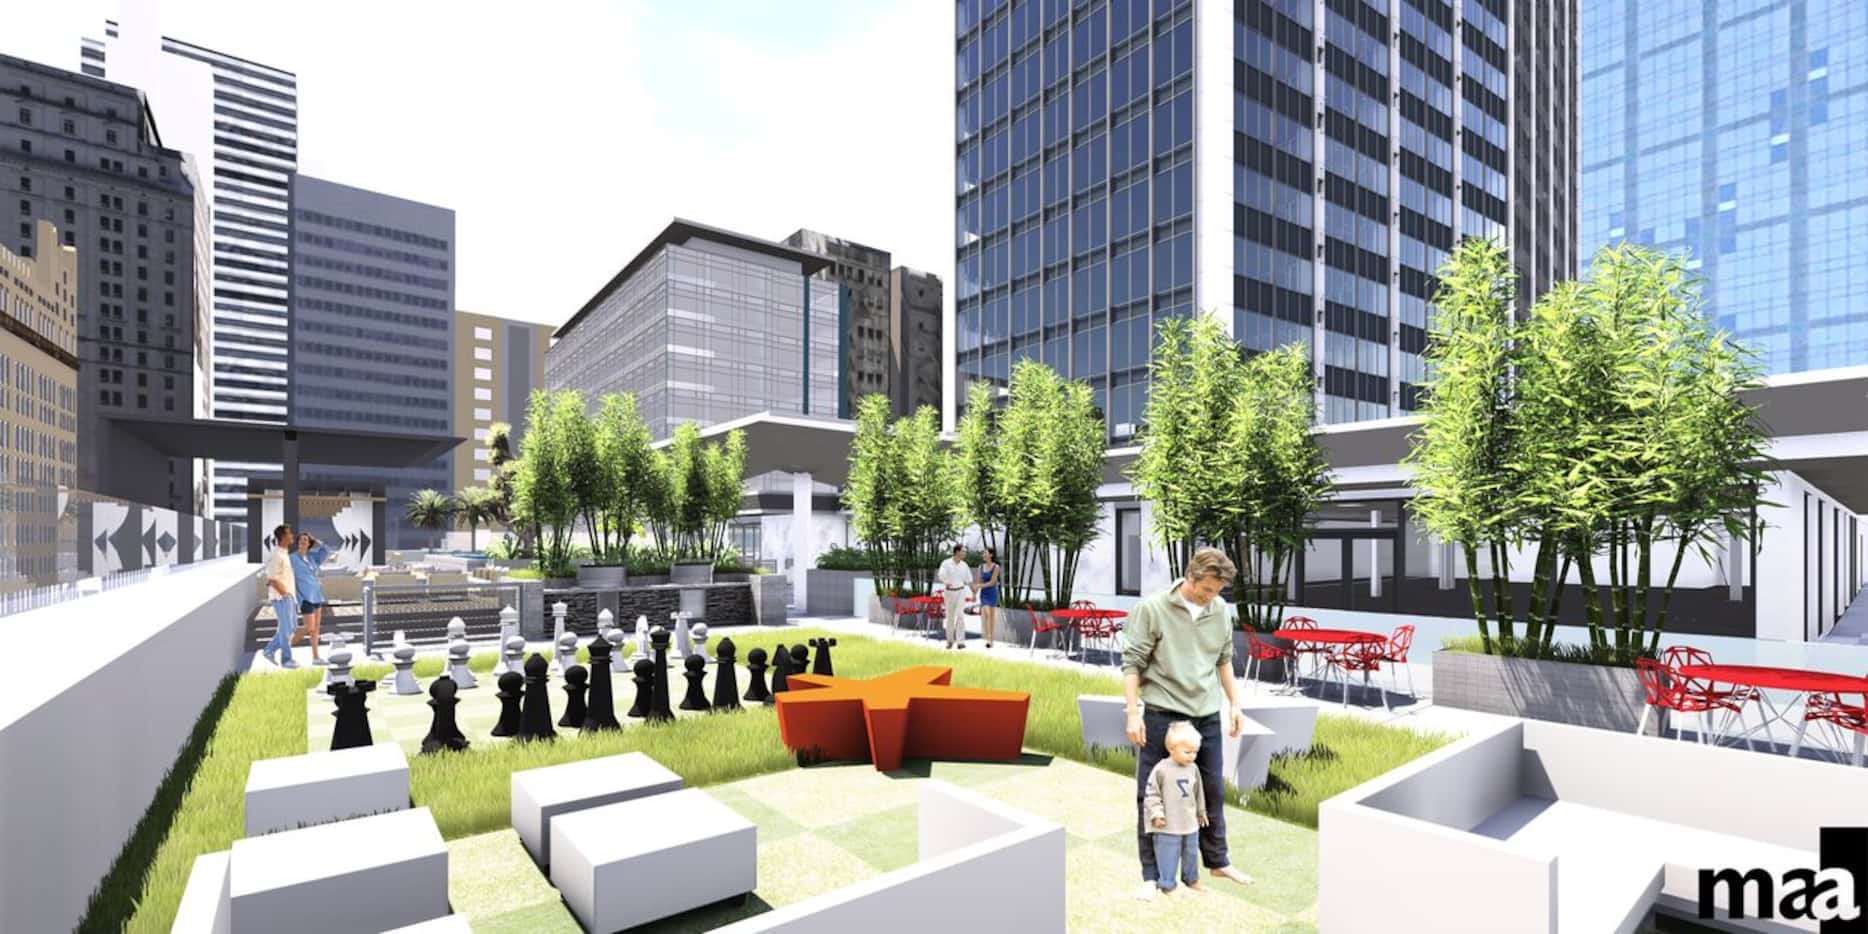 Redevelopment plans for the 52-story former First National Bank tower at 1401 Elm St. in...